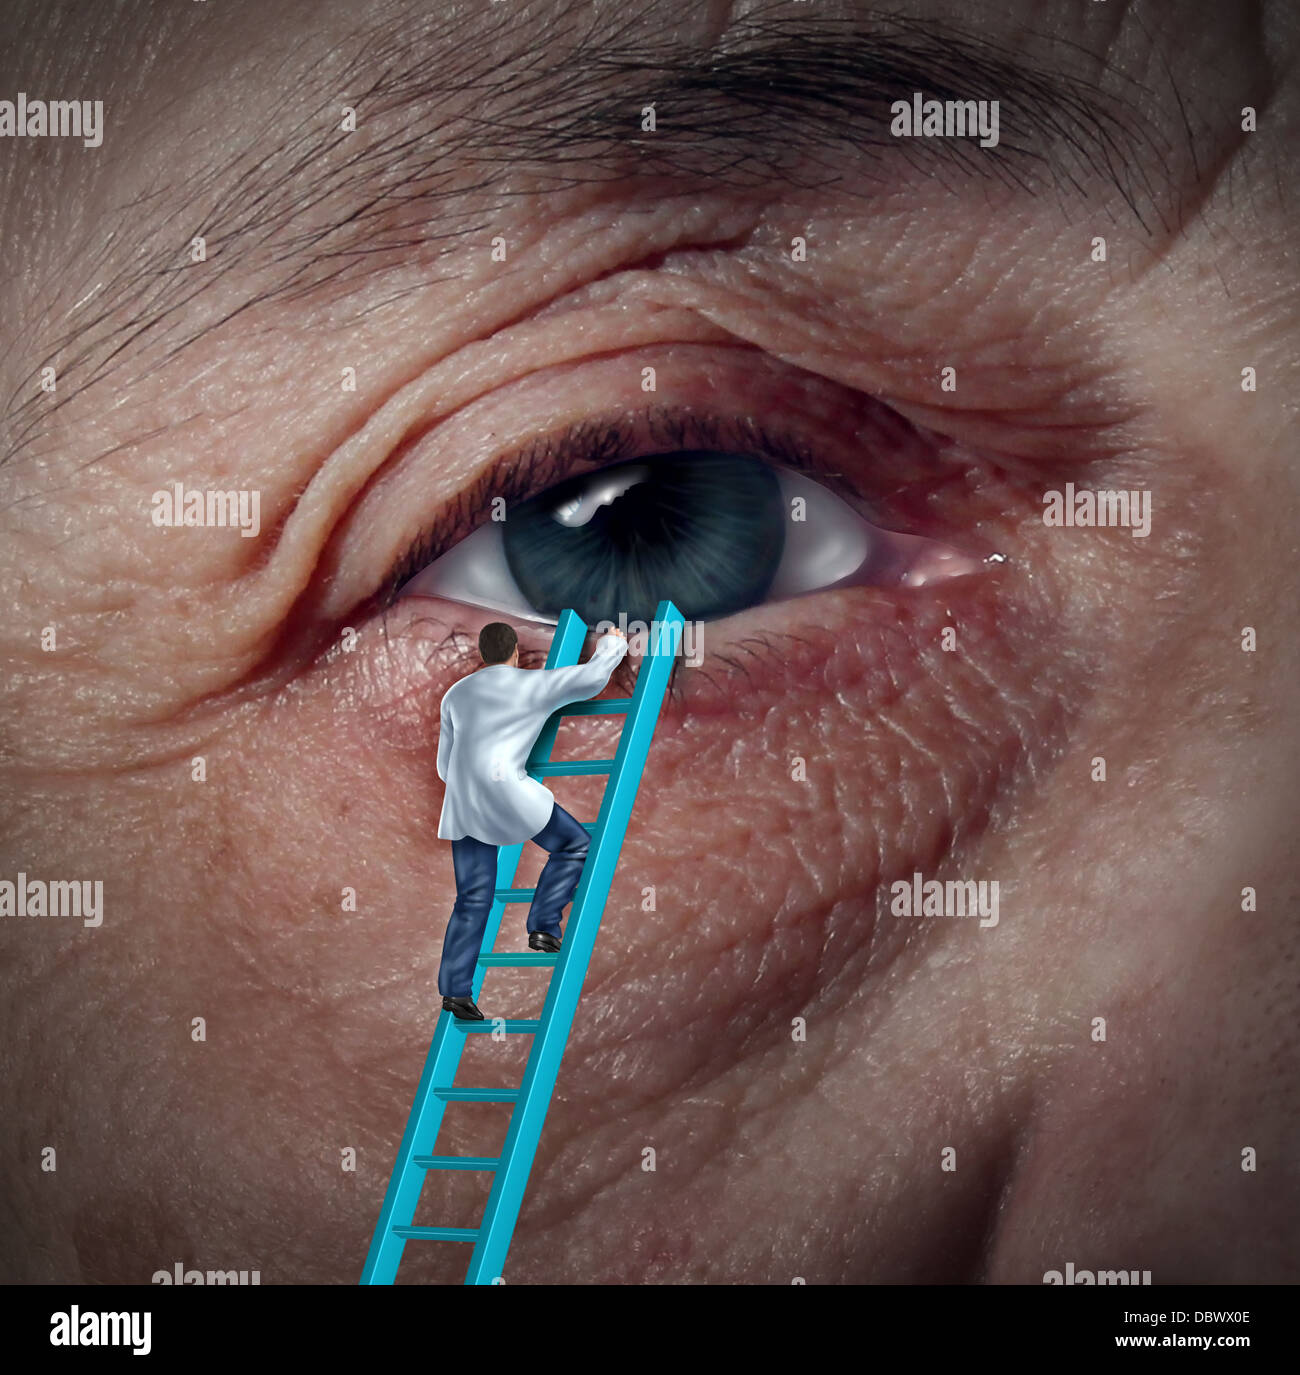 Medical Eye Care concept with an ophthalmologist or optometrist climbing a ladder to givie a diagnosis on an aging elderly patient that may have vision problems due to cataracts or other ocular diseases. Stock Photo